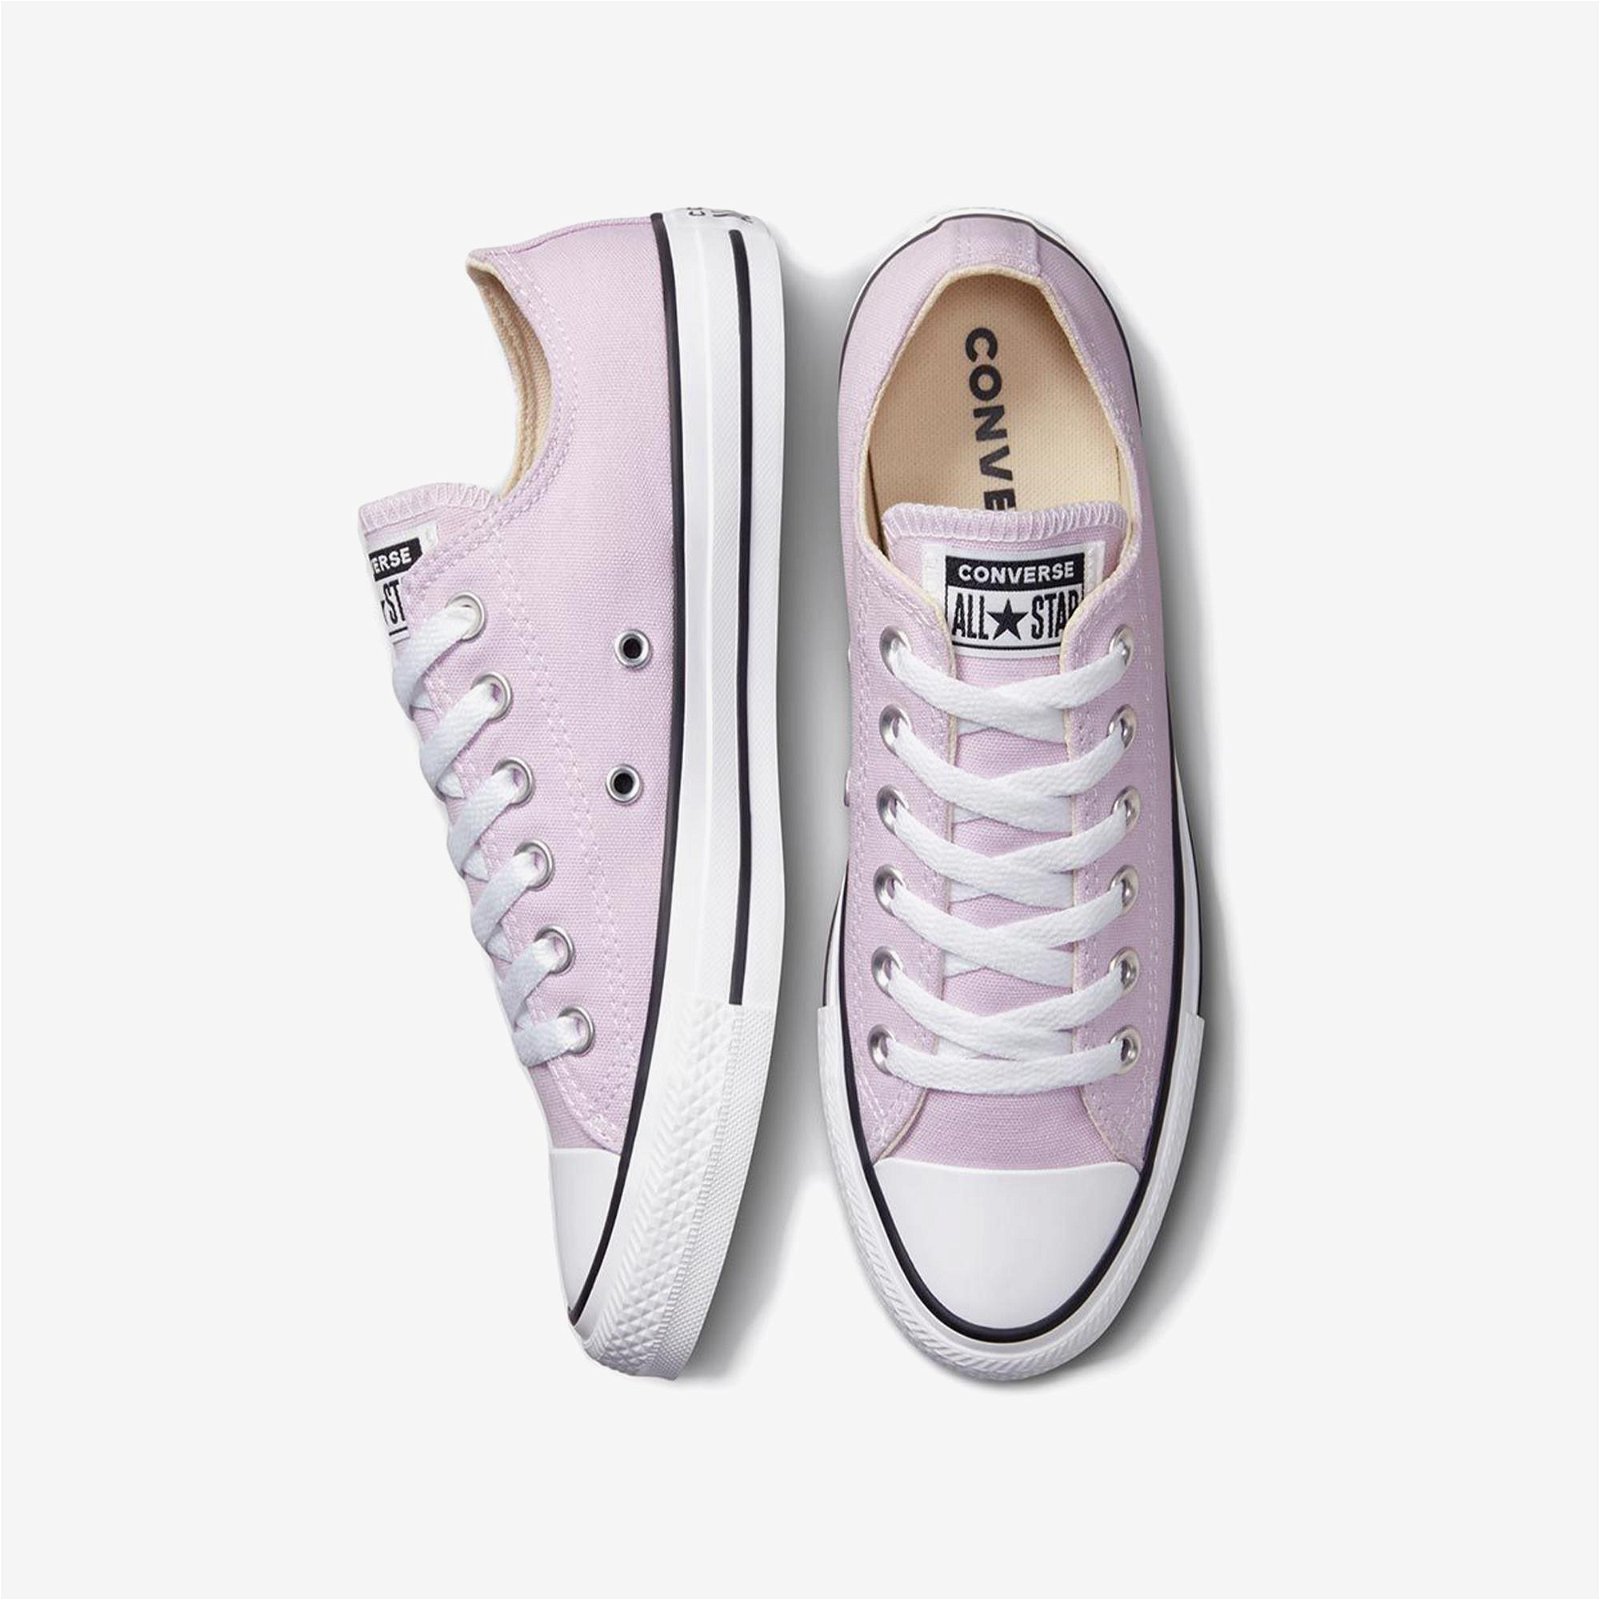 Converse Chuck Taylor All Star 50/50 Recycled Cotton Low Unisex Pembe Sneaker